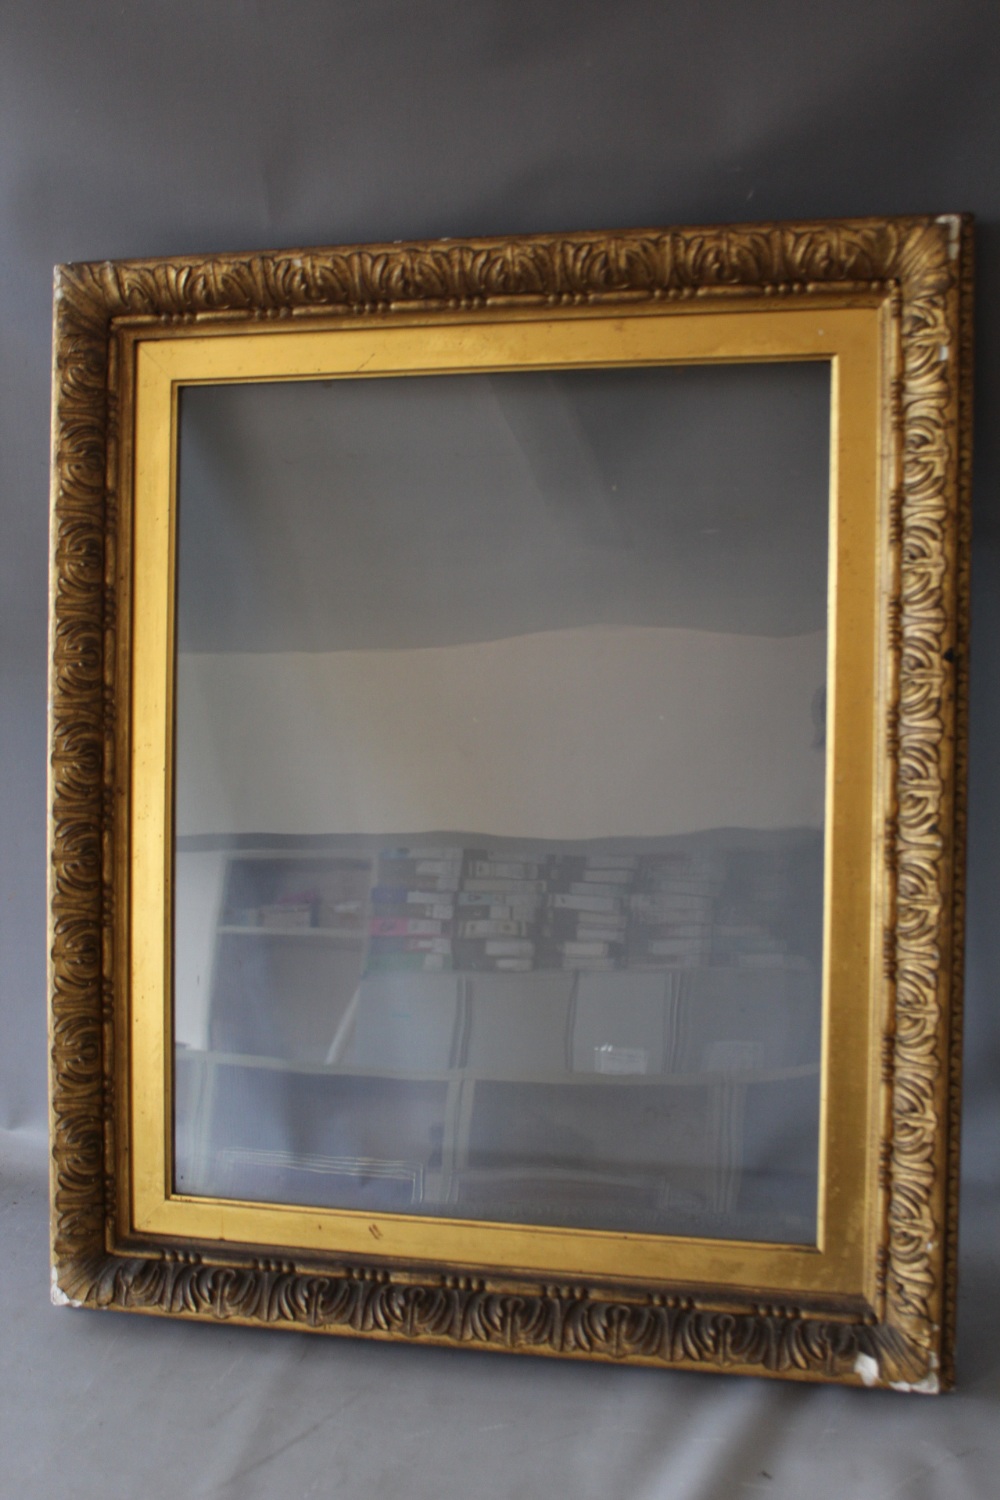 A 19TH CENTURY GOLD FRAME WITH DECORATIVE DESIGN TO OUTER EDGE AND GOLD SLIP, glazed, frame W 6.5